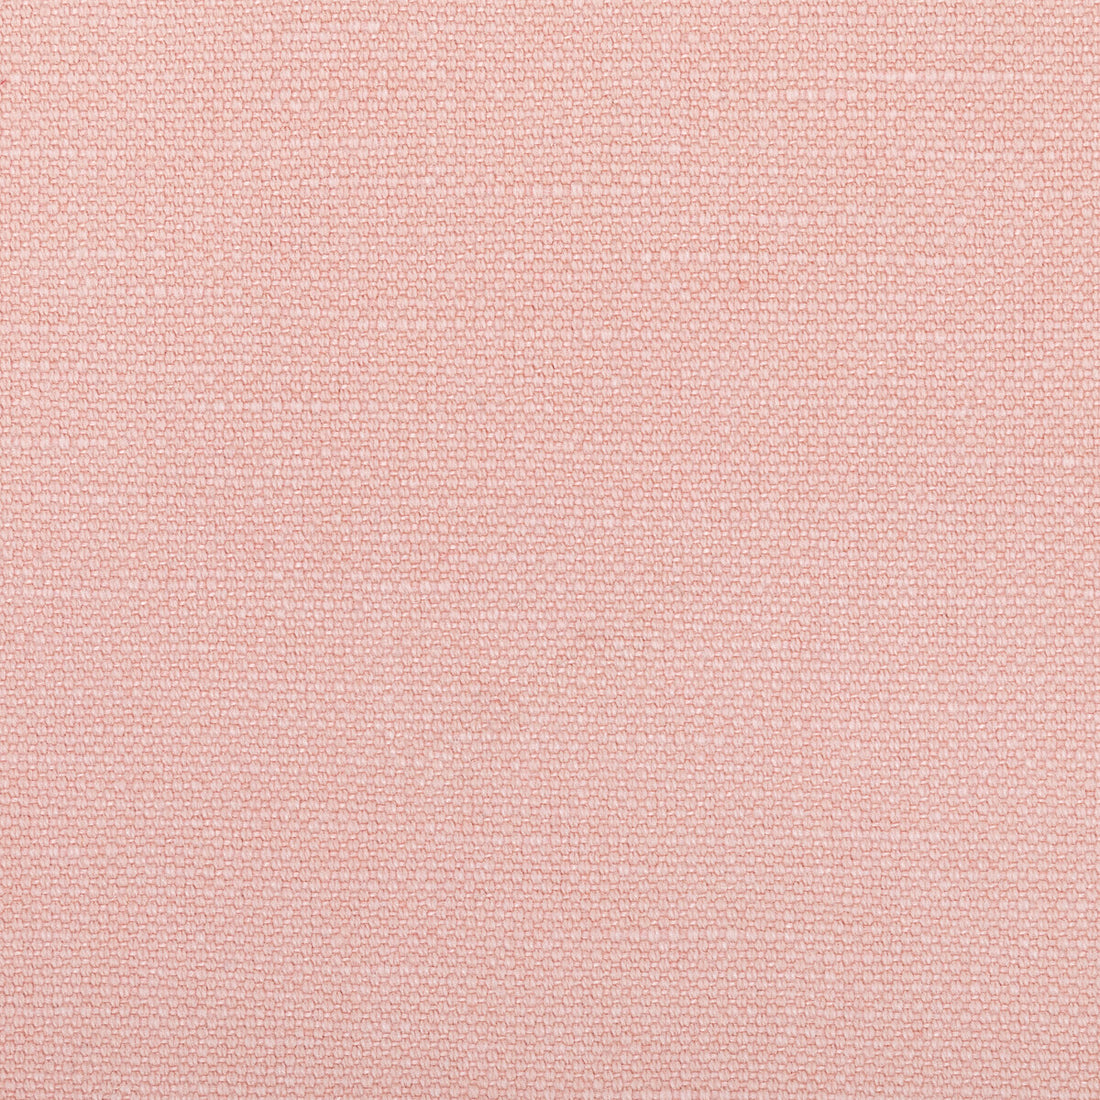 Carson fabric in playful pink color - pattern 36282.17.0 - by Kravet Basics